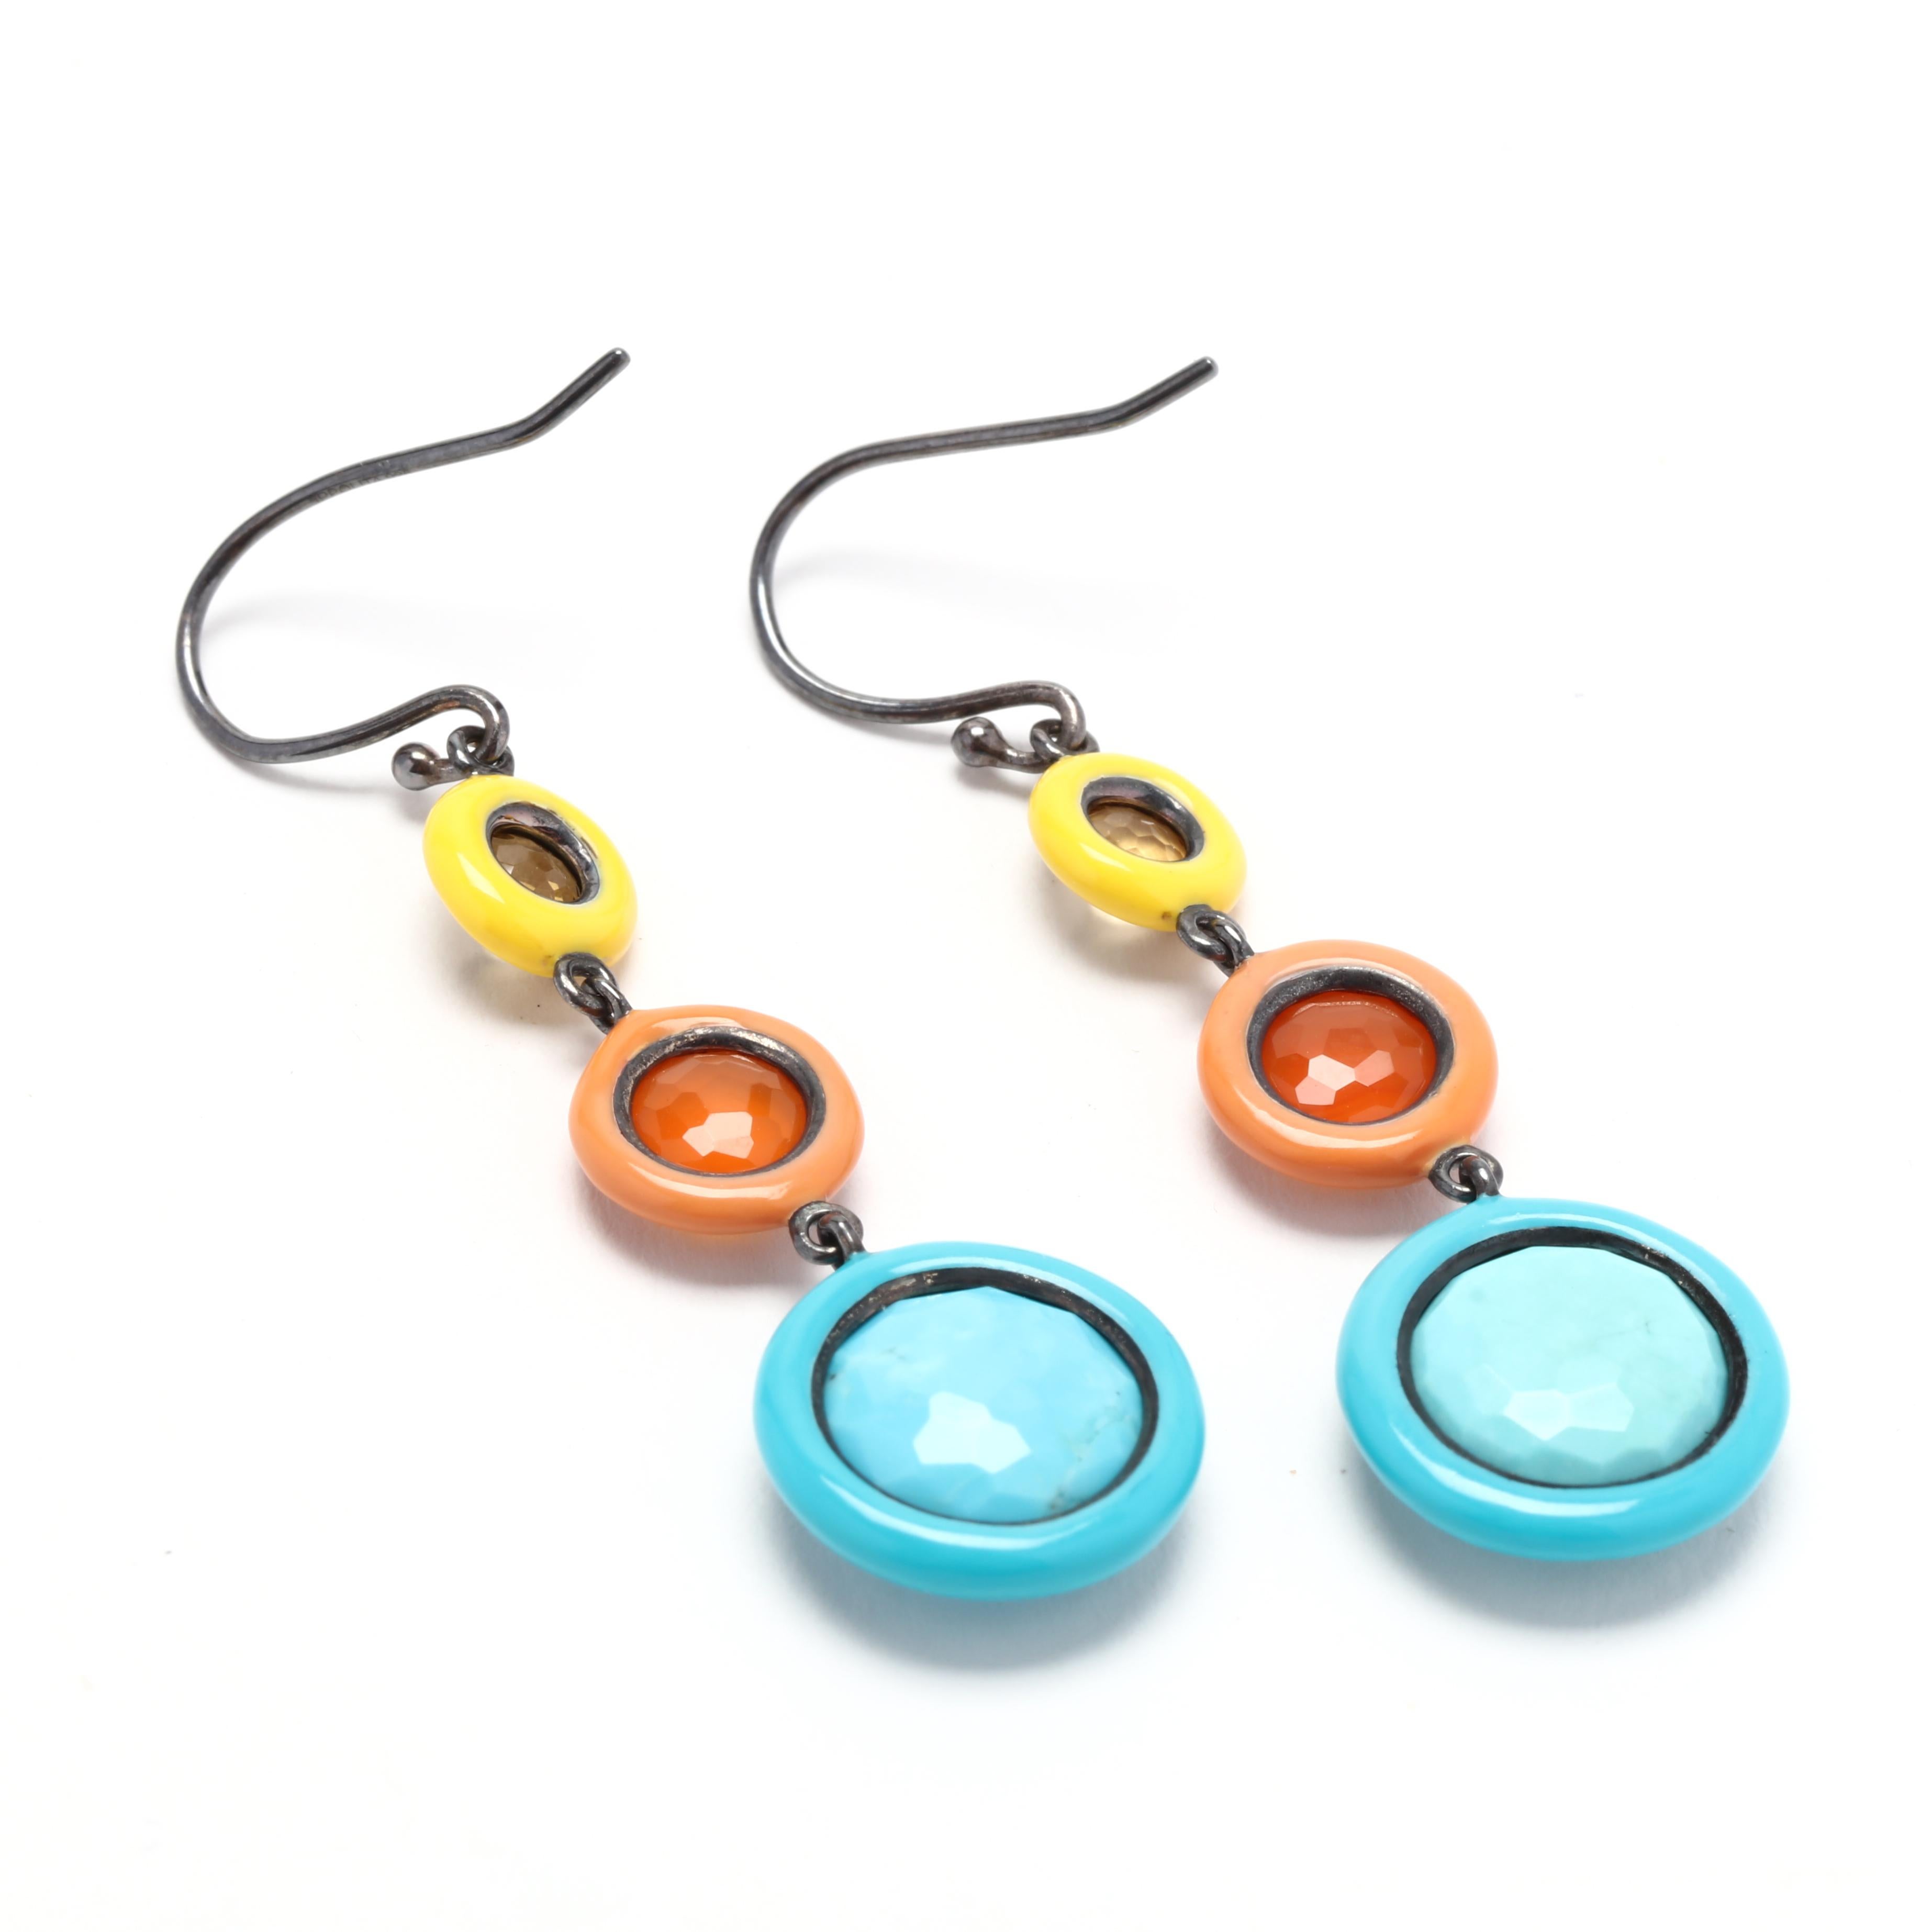 These Ippolita multi-color dangle earrings are a stunning addition to any jewelry collection. Handcrafted with care, they feature vibrant ceramic beads in a variety of complementary colors. Made with sterling silver, these earrings are both durable